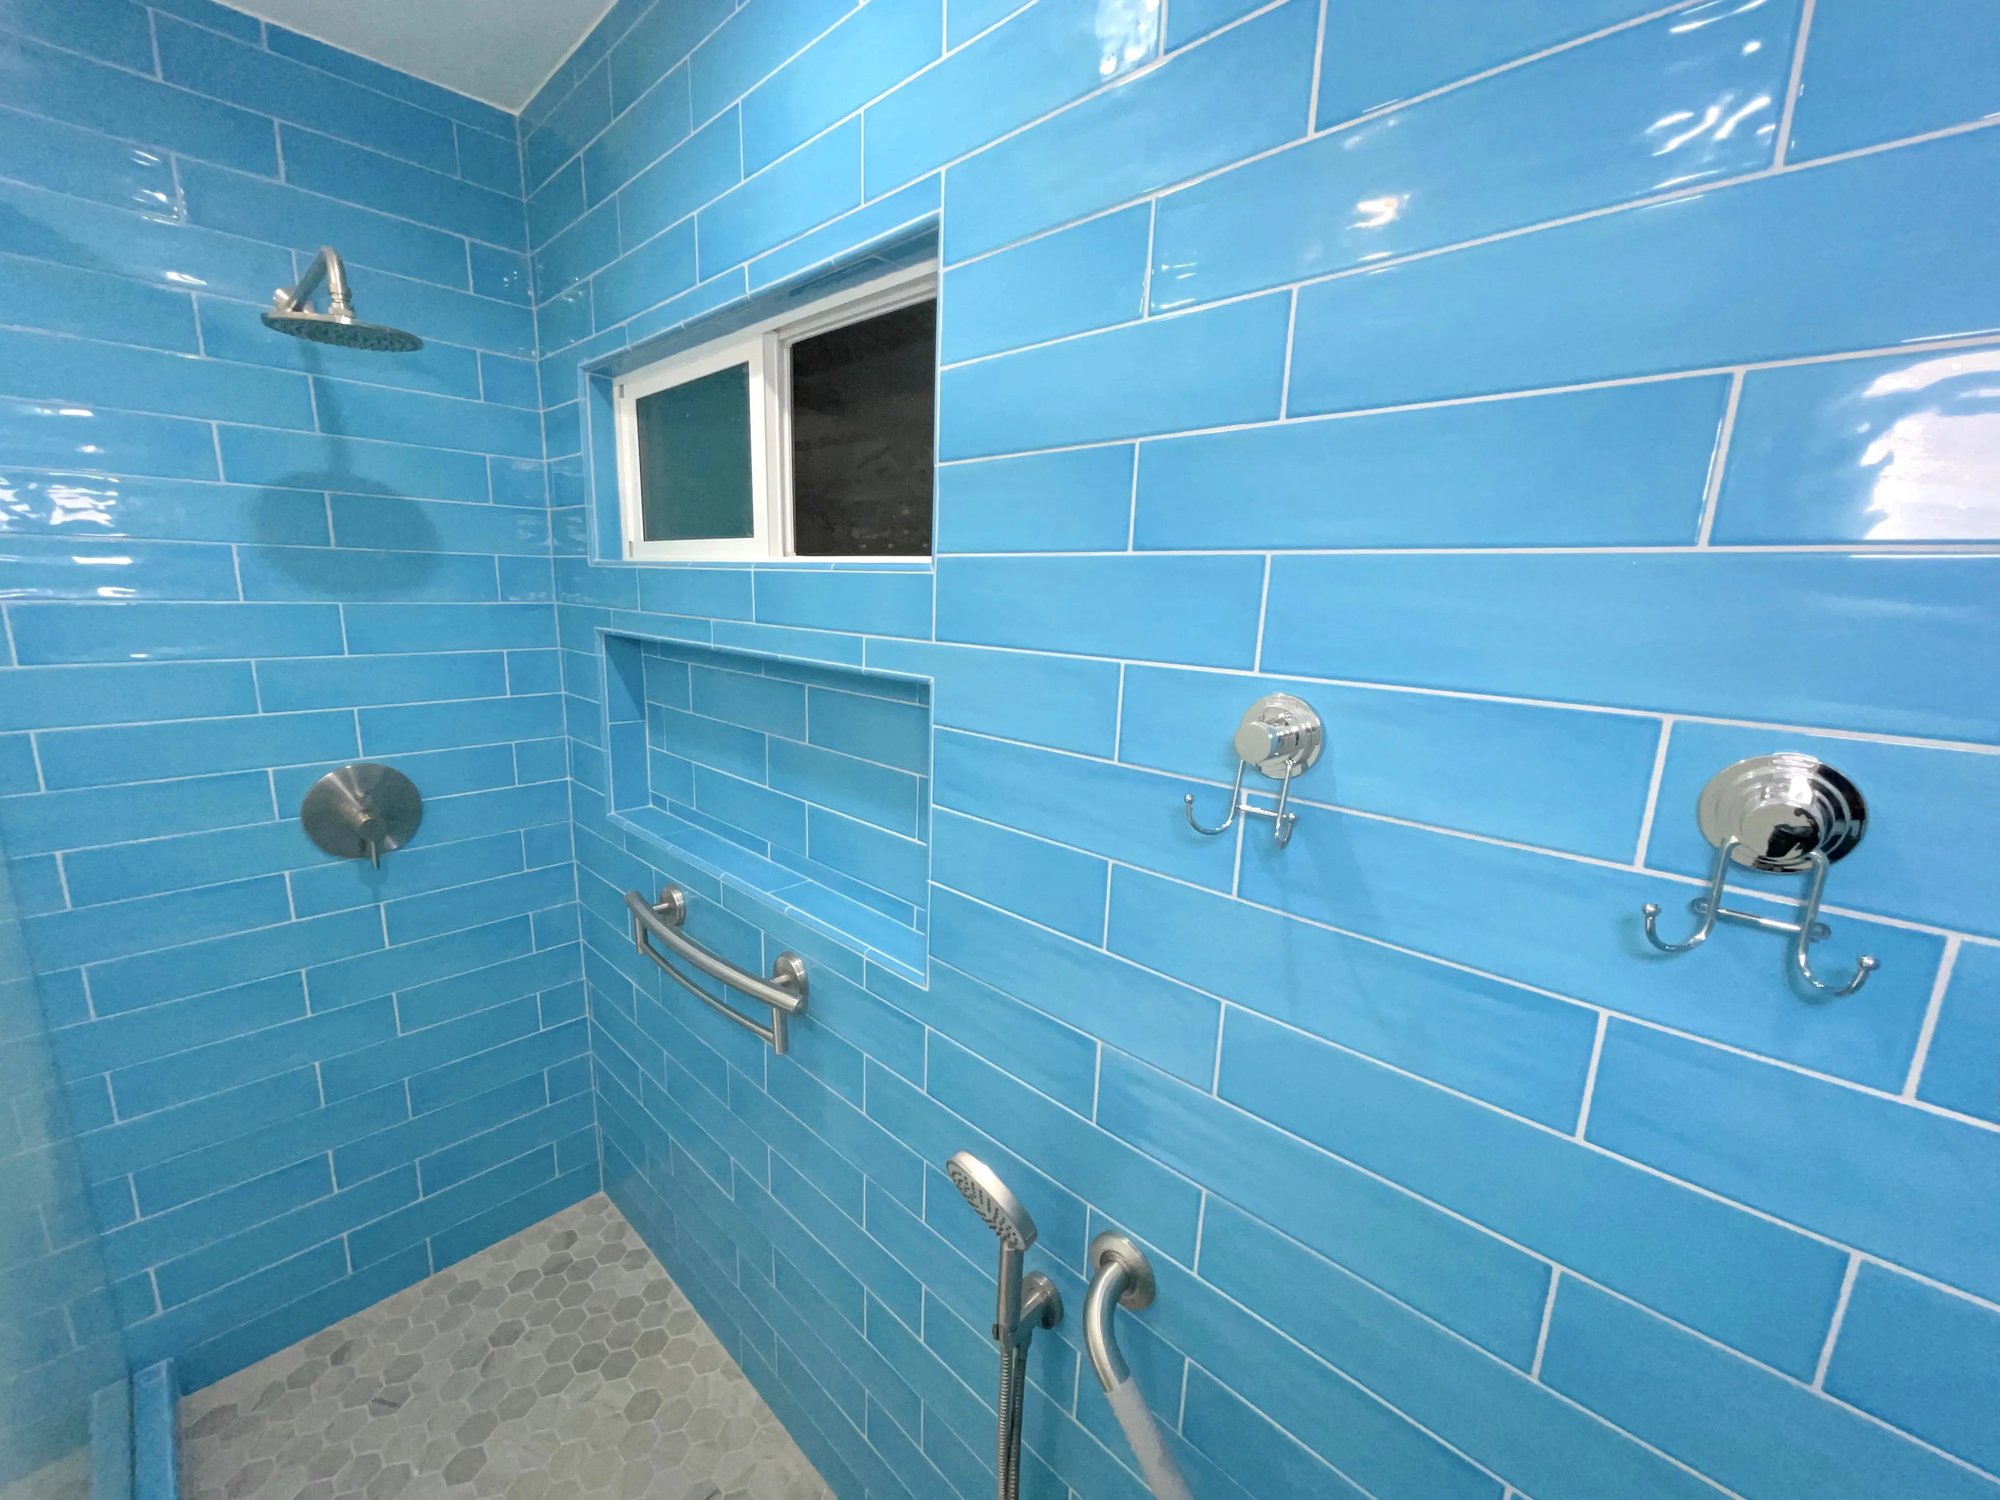 Chrome fixtures and blue glass tile was used floor to ceiling for the shower in the master bathroom.